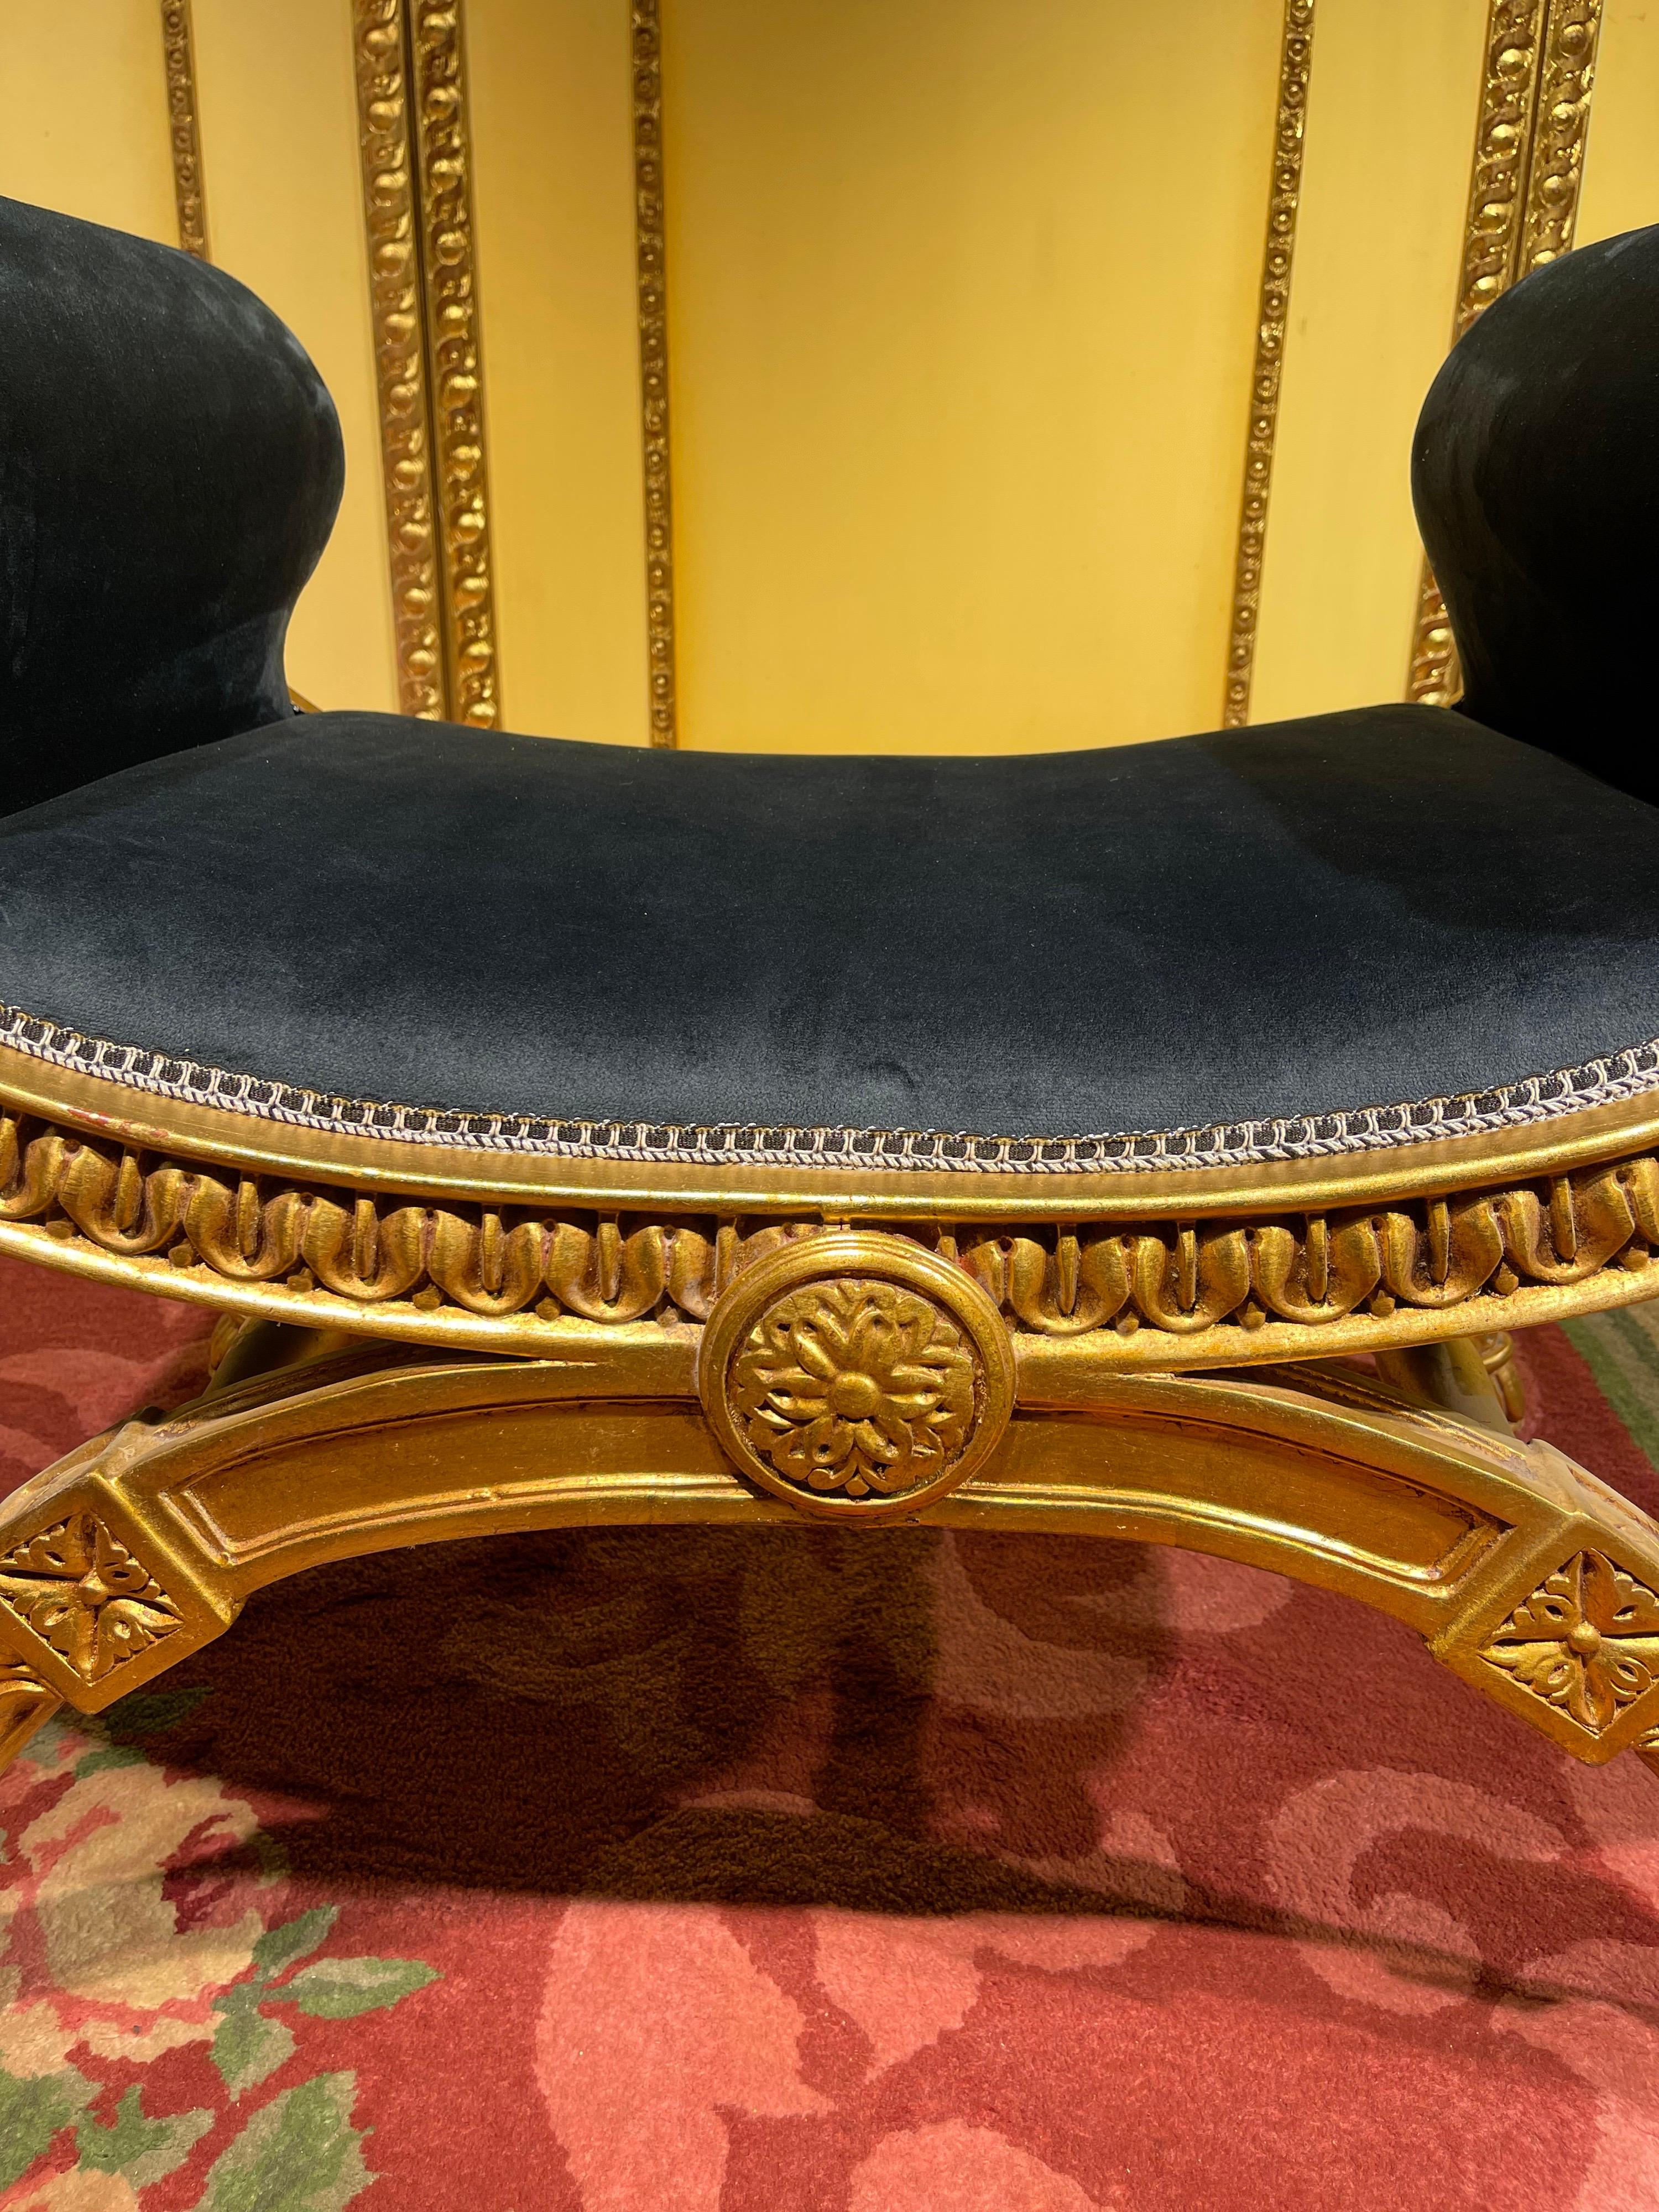 Exceptional French Bench, Stool, Gondola in Empire For Sale 8